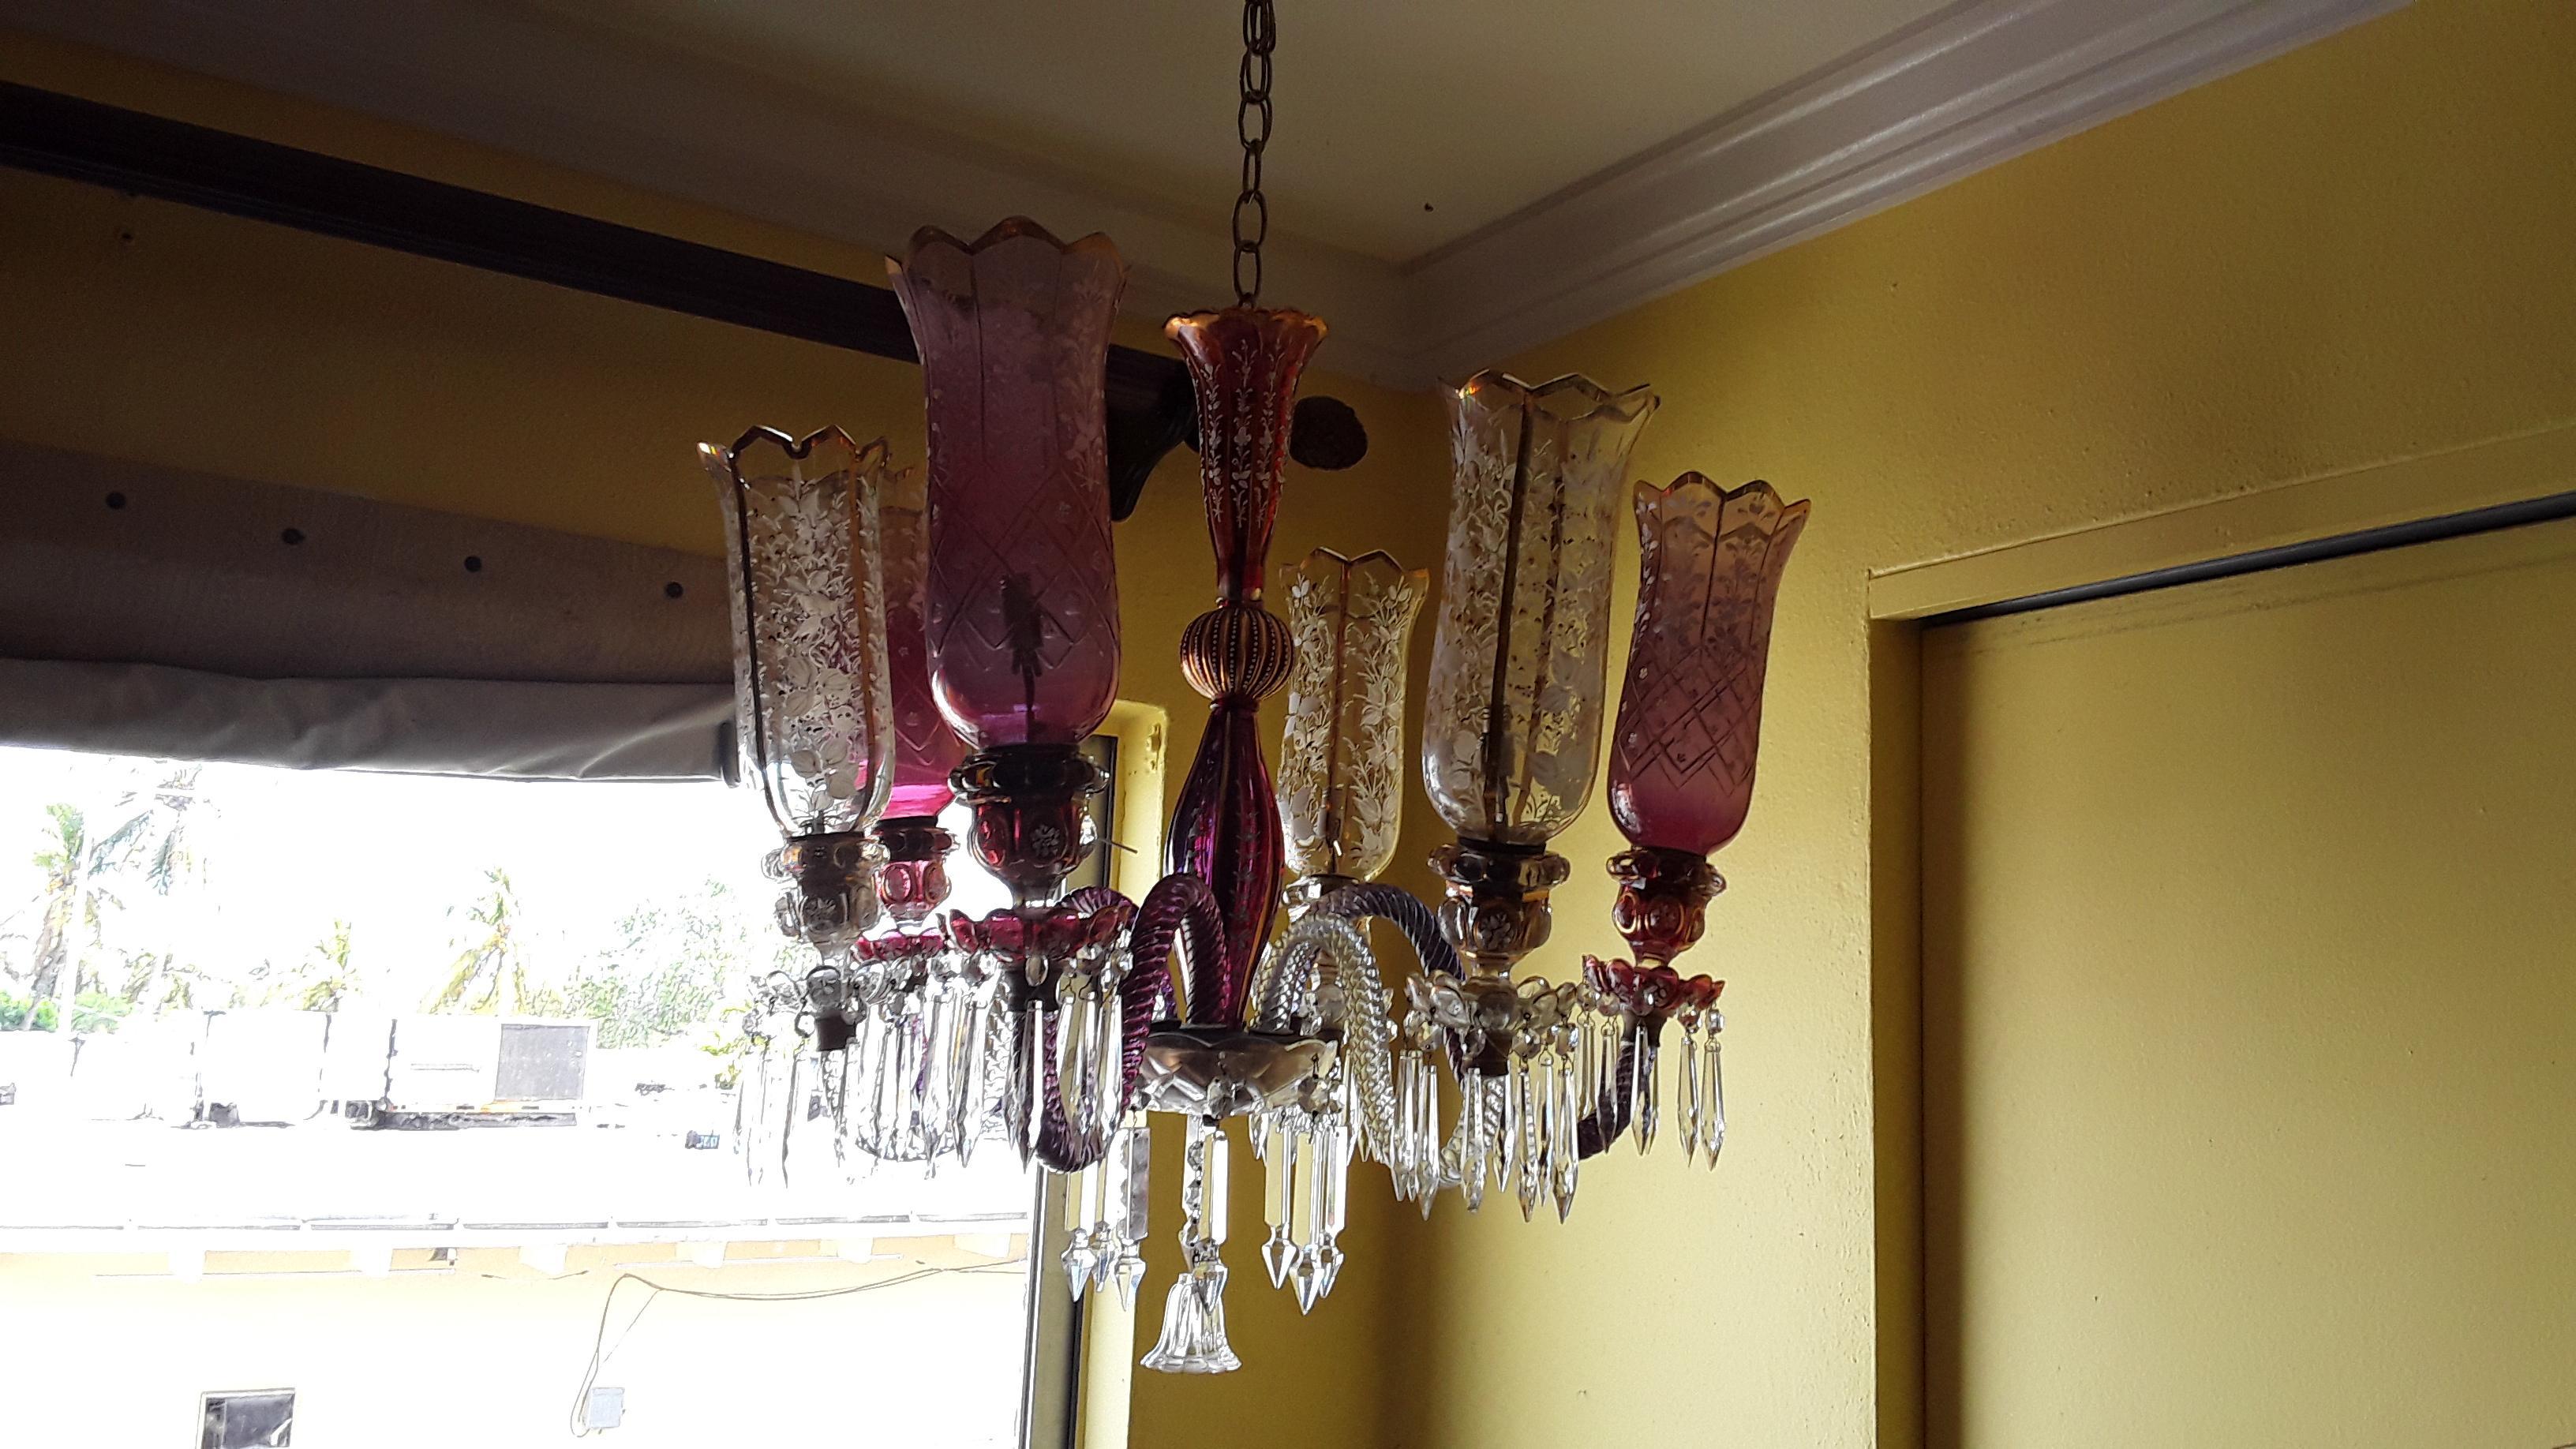 c1850's French Antique Napoleon III Purple and Clear Rop Twist / Floral Decor Chandelier. This piece has been restored and the enamel flower work is hand painted. There are 3 purple arms and 3 clear arms. Hurricane Shades 3 Purple and 3 clear